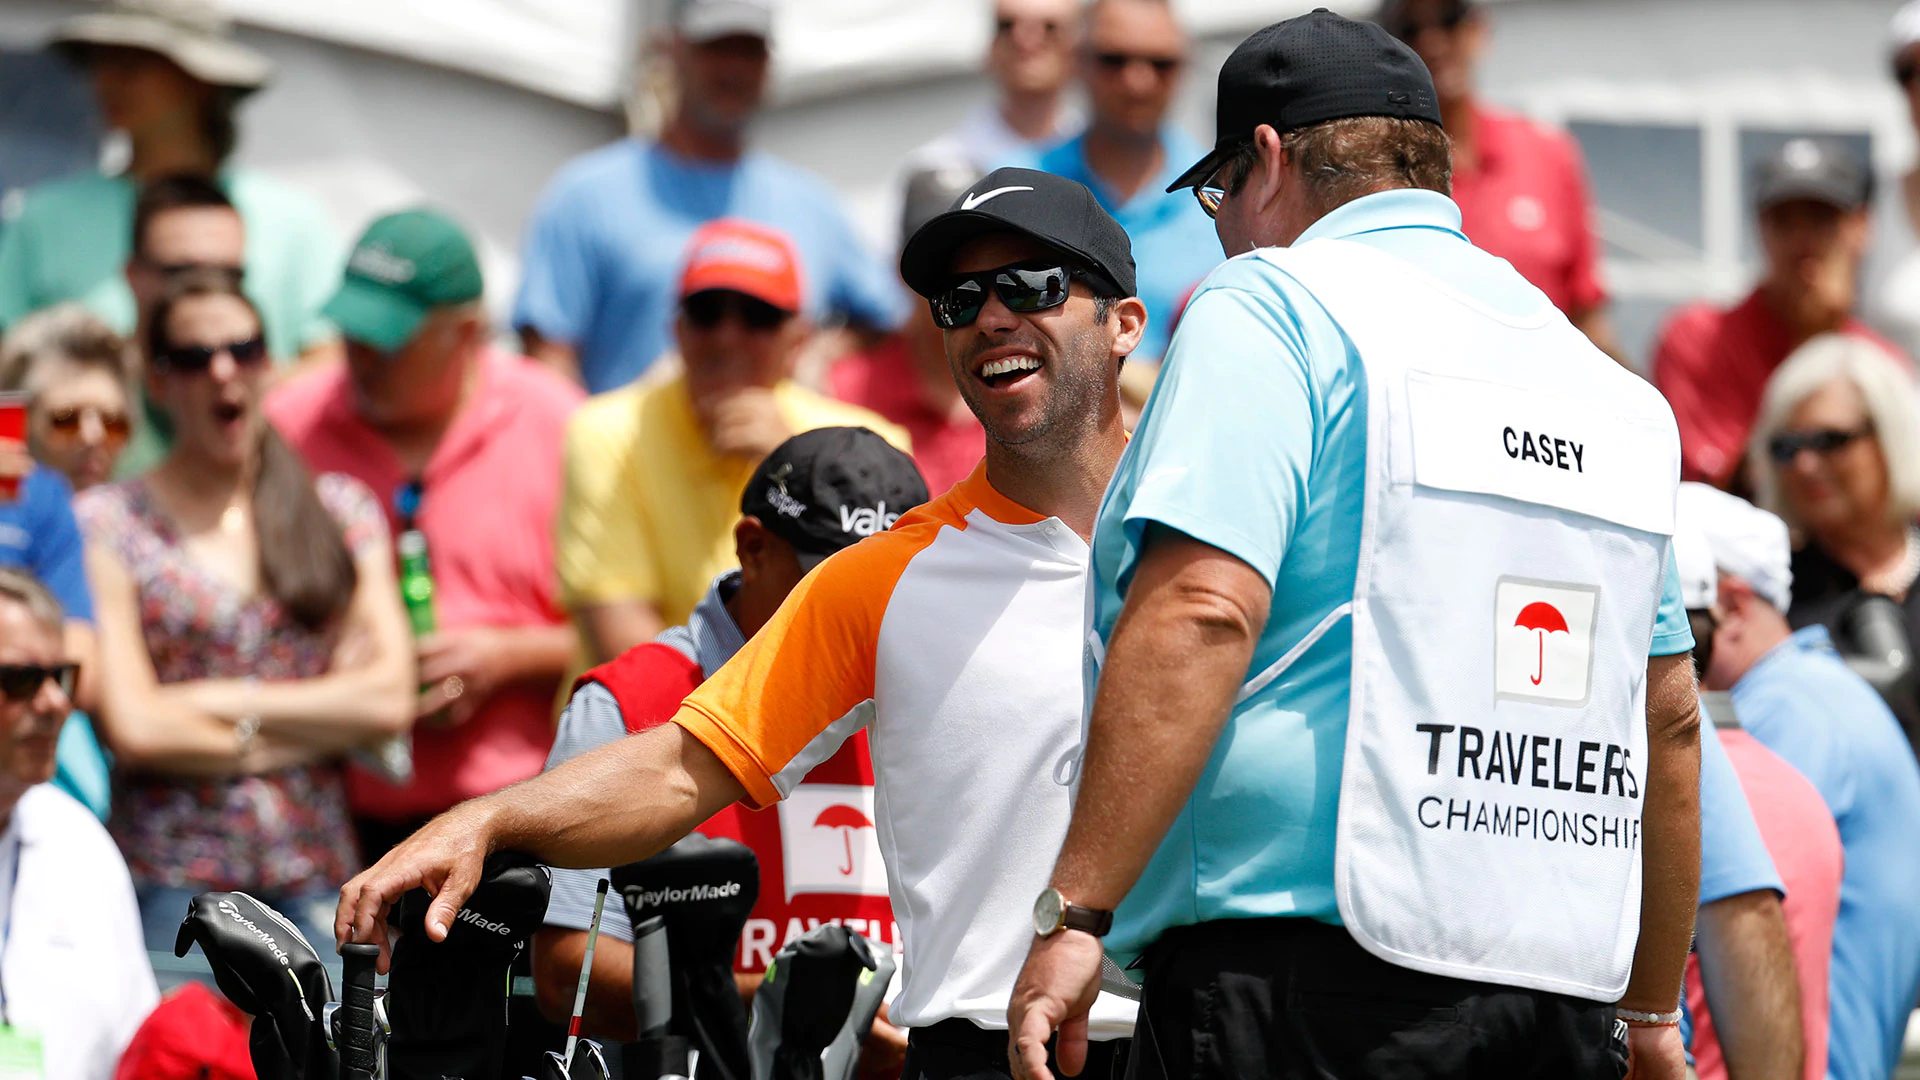 Casey makes temporary caddie switch at Travelers